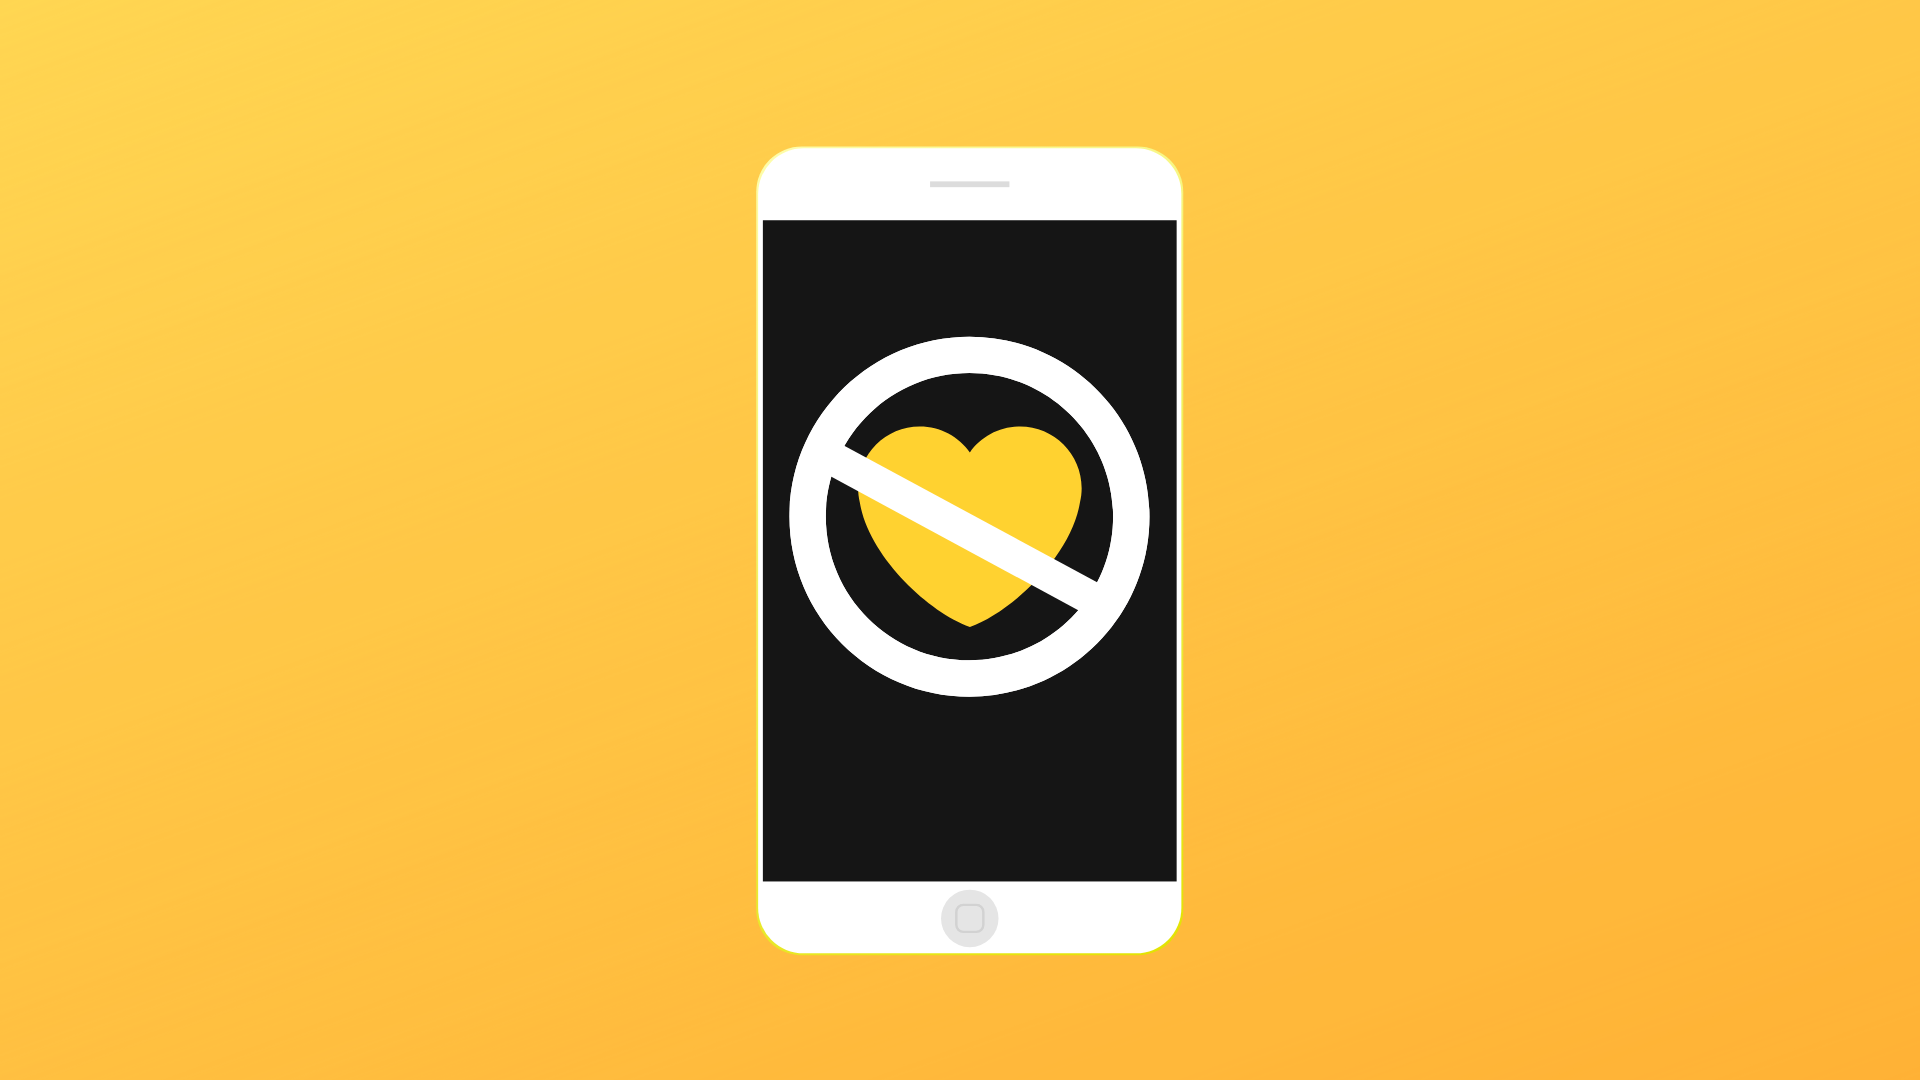 A white phone showcasing a yellow heart with a unallowed sign across it. All on a yellow background.